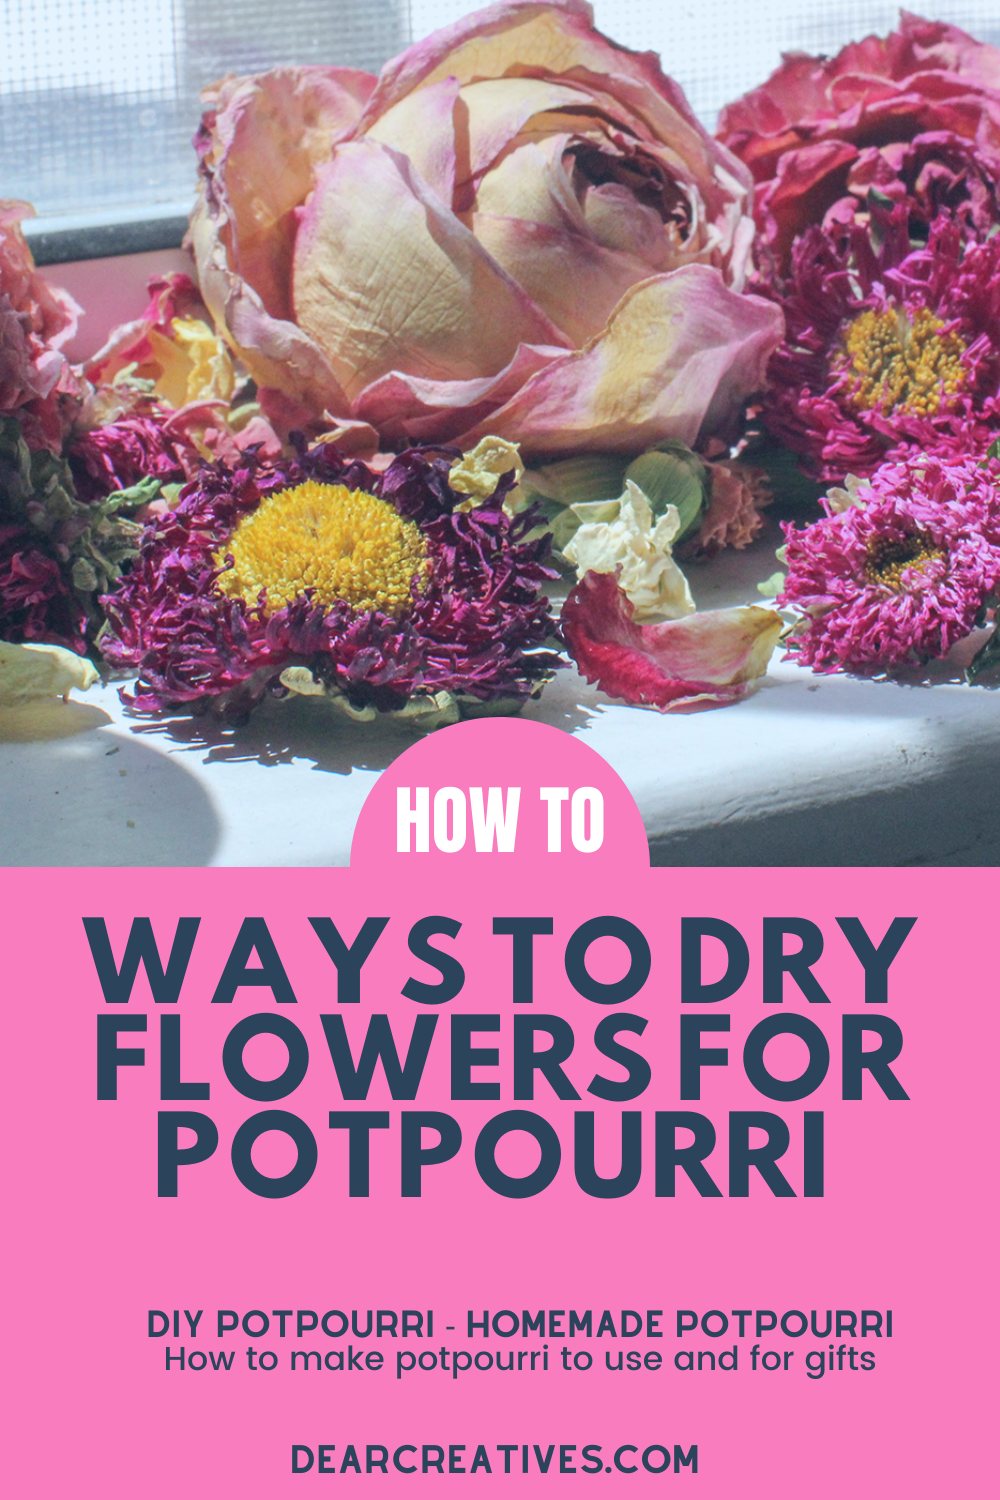 Ways-to-dry-flowers-to-make-potpourri-at-home-DIY-dried-flowers-and-dried-roses-at-DearCreatives.com-